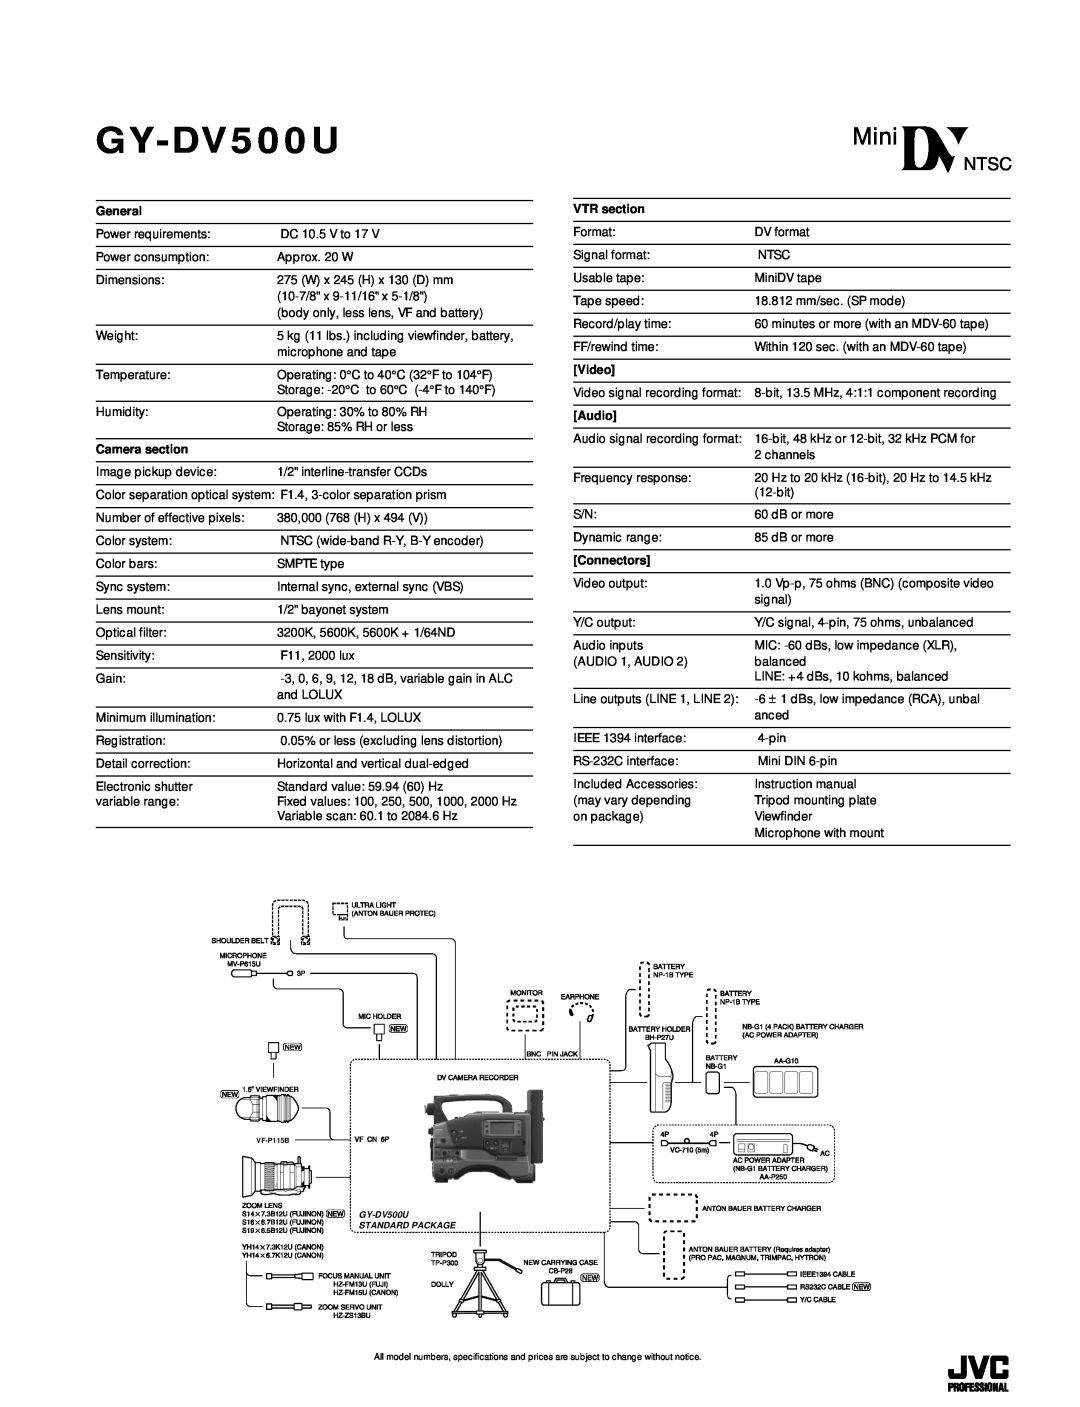 JVC BR-DV600U specifications GY-DV500U, General, Camera section, VTR section, Video, Audio, Connectors 